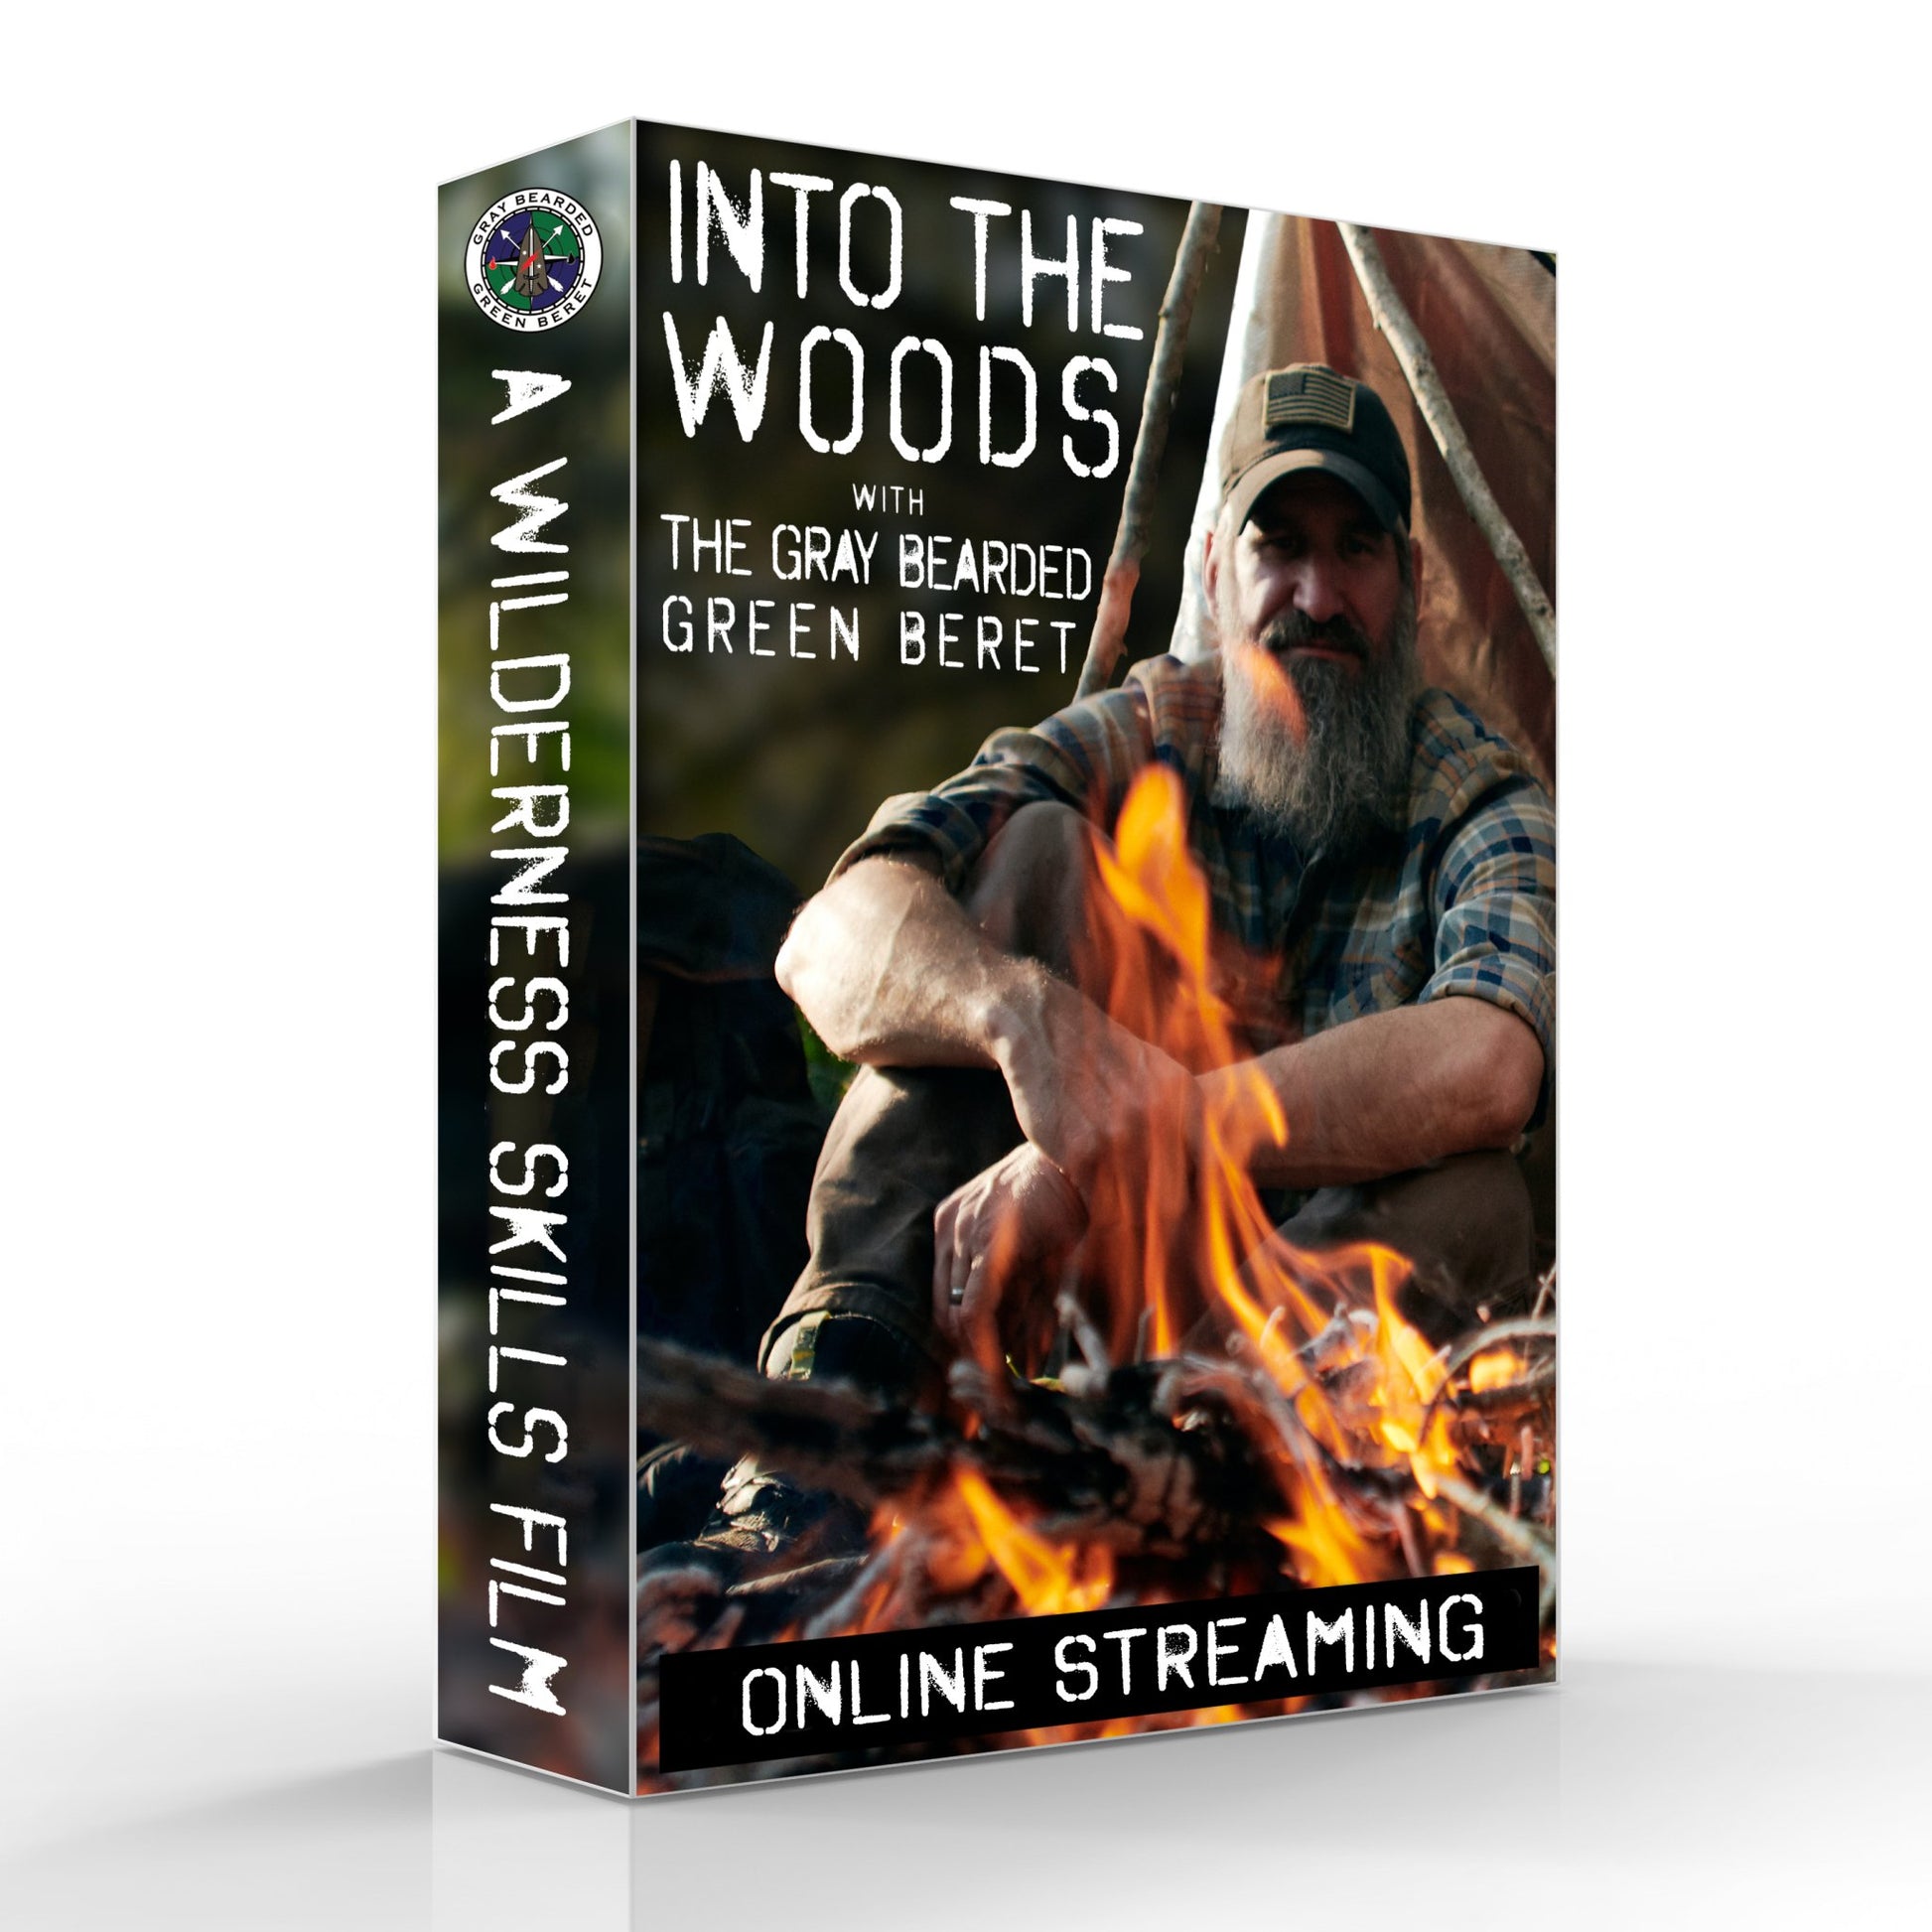 Into the Woods (Online Streaming) - Gray Bearded Green Beret